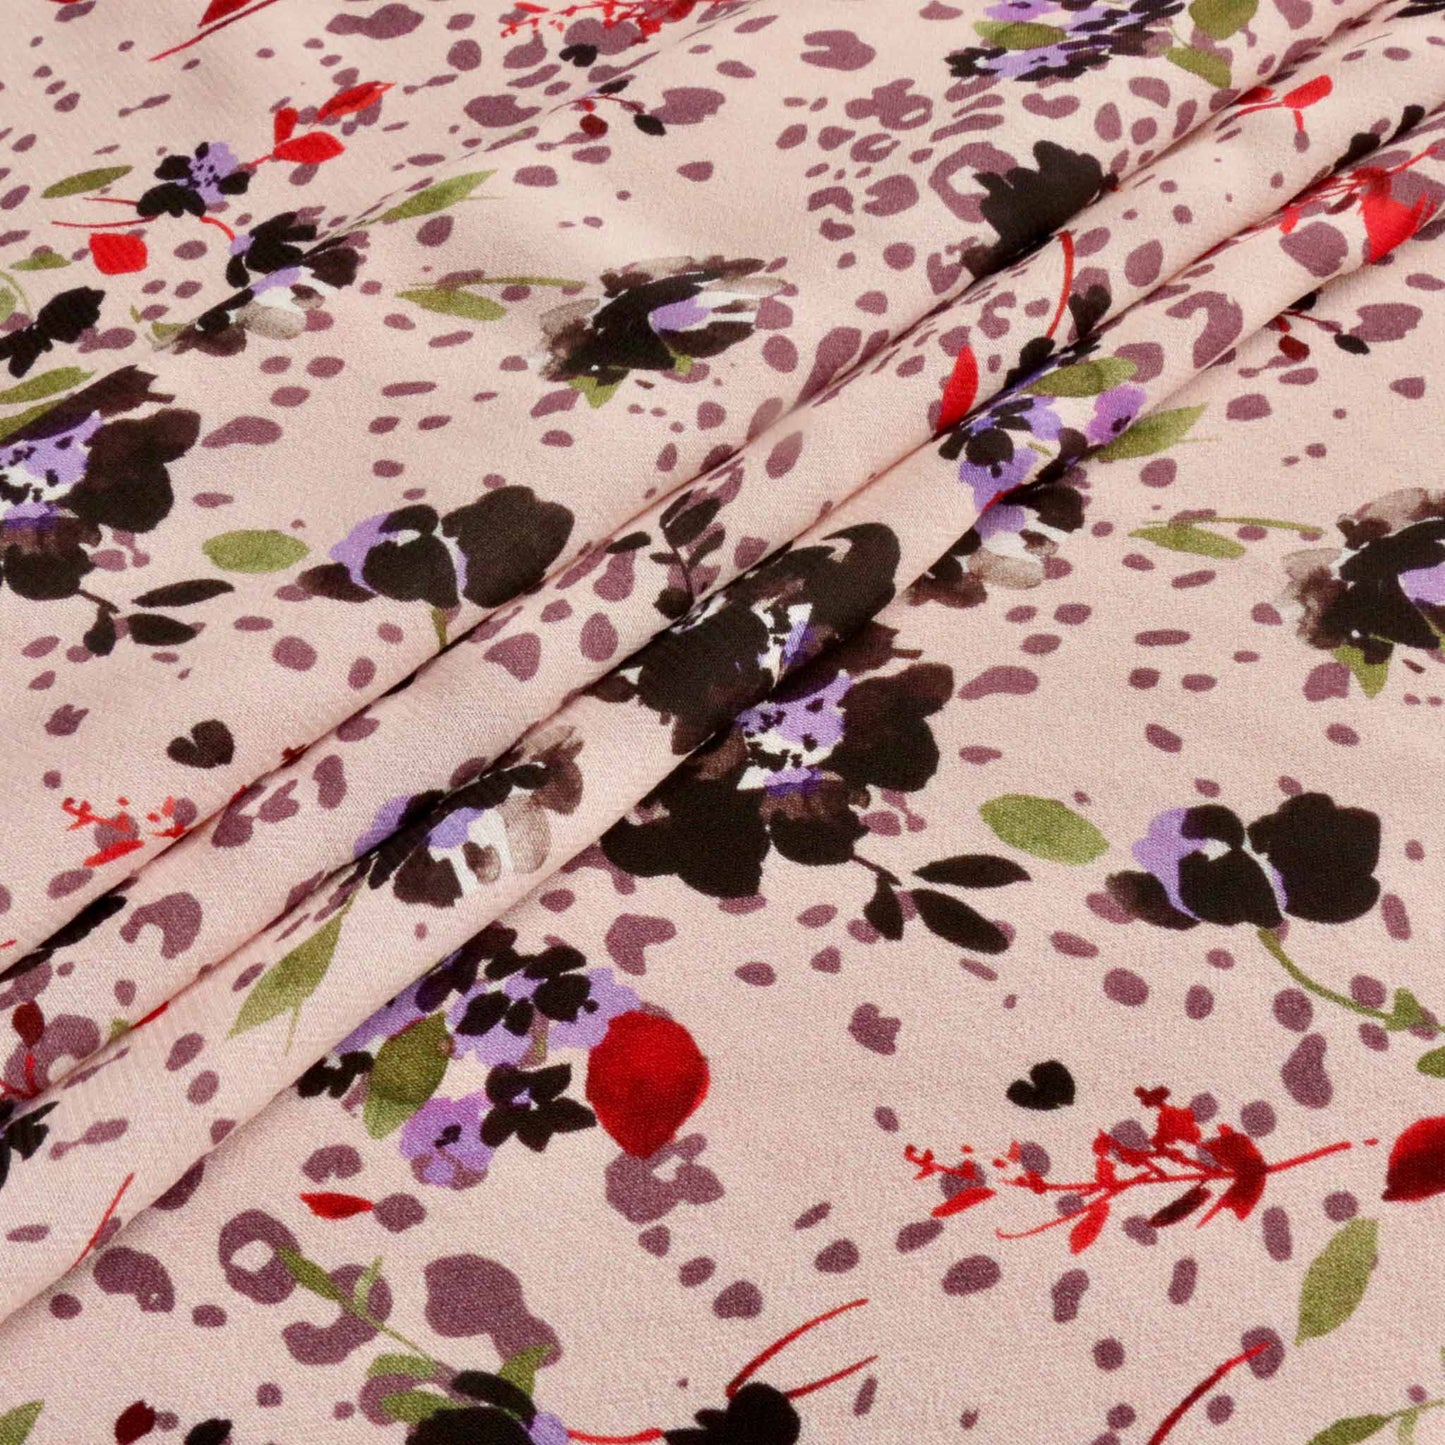 chiffon dressmaking fabric in pink with animal and floral print